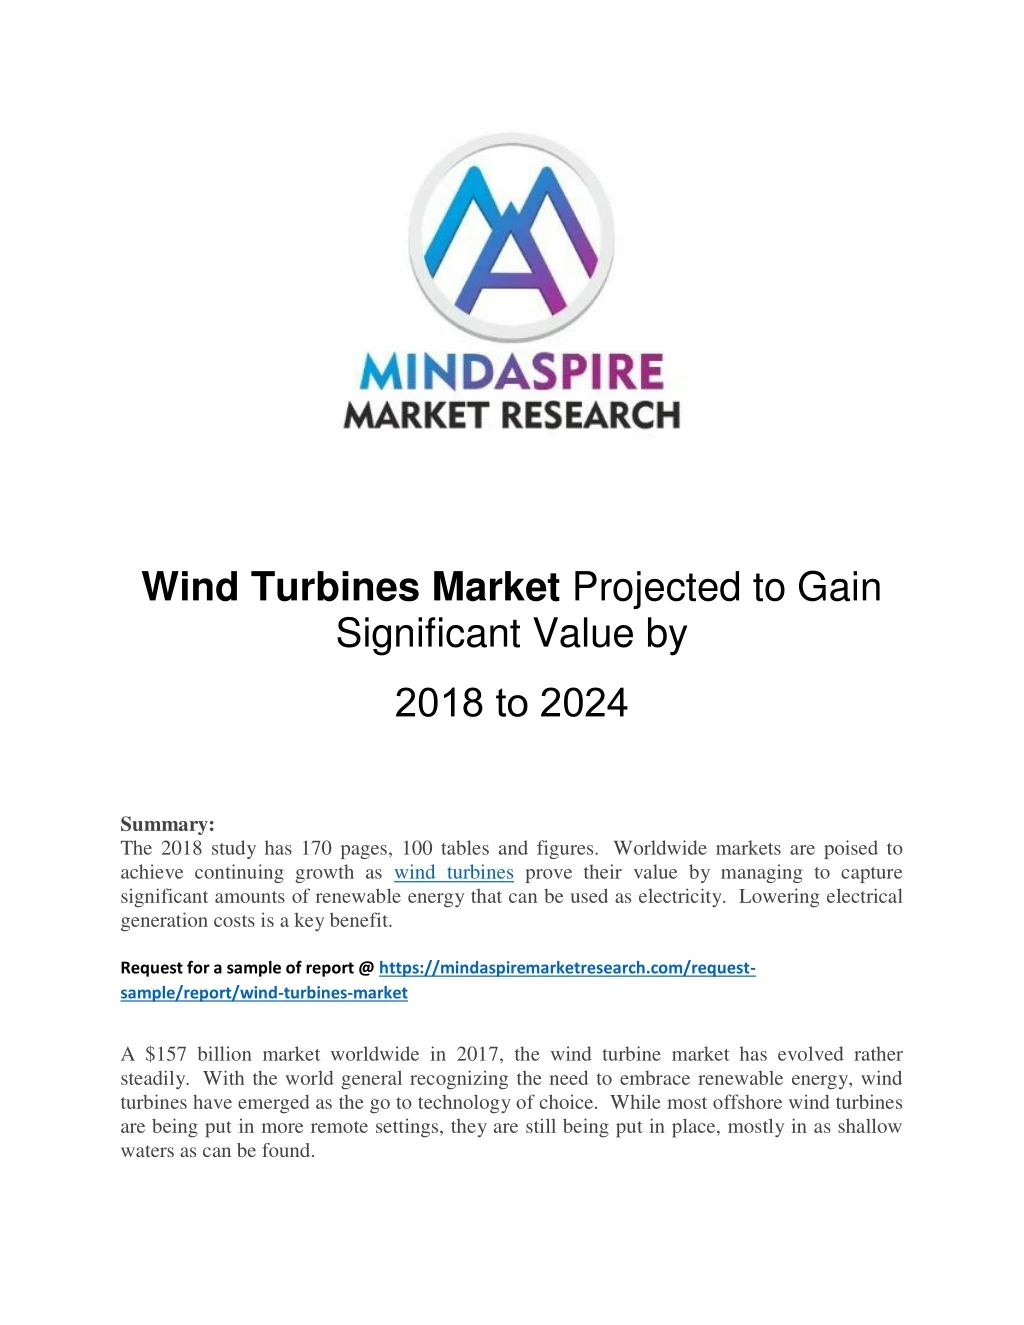 wind turbines market projected to gain